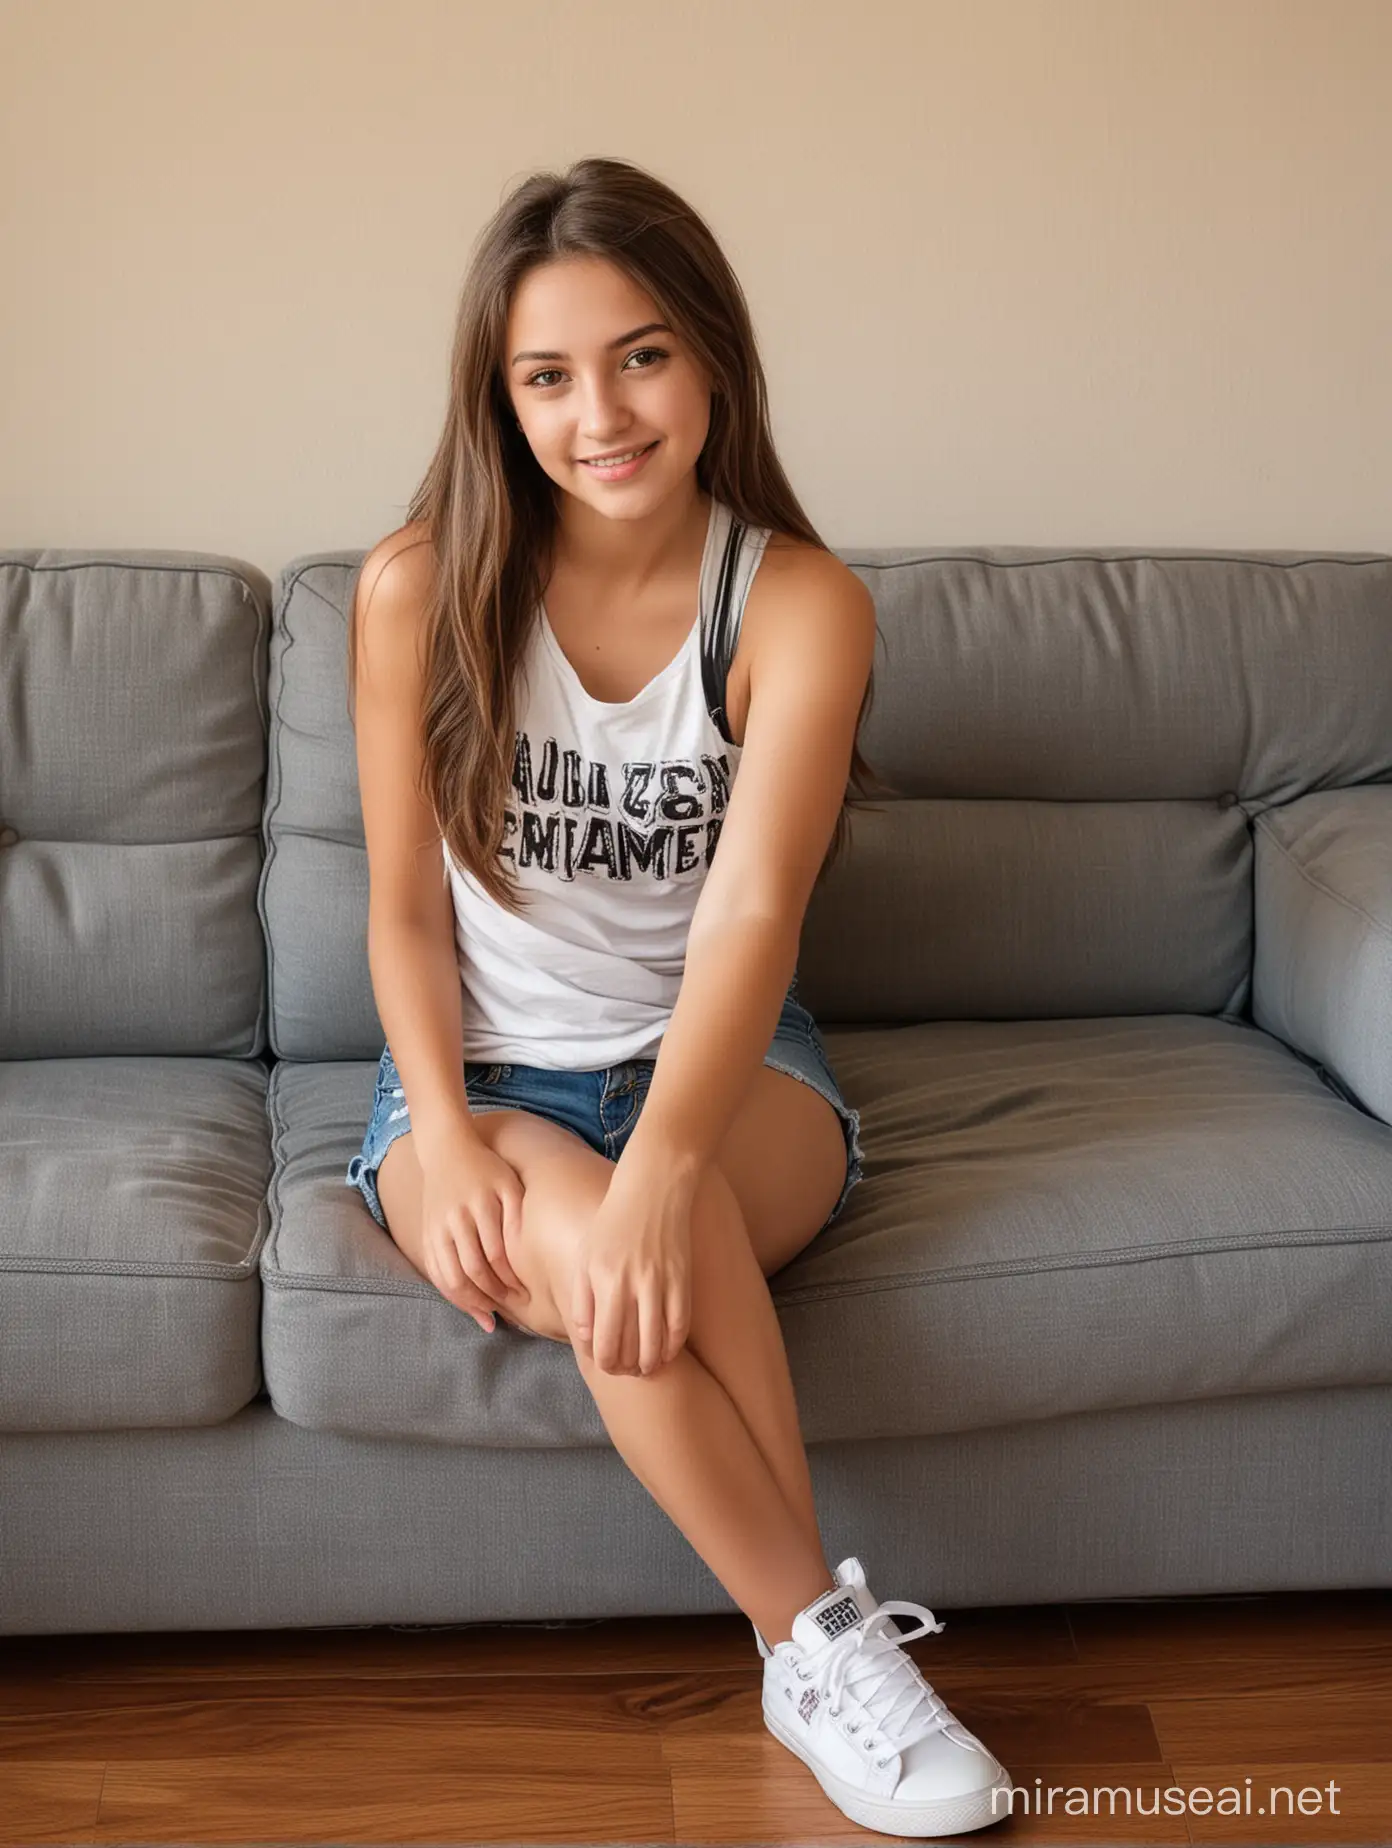 Teenage Girl Relaxing on Couch in Casual Attire on Sunny Day